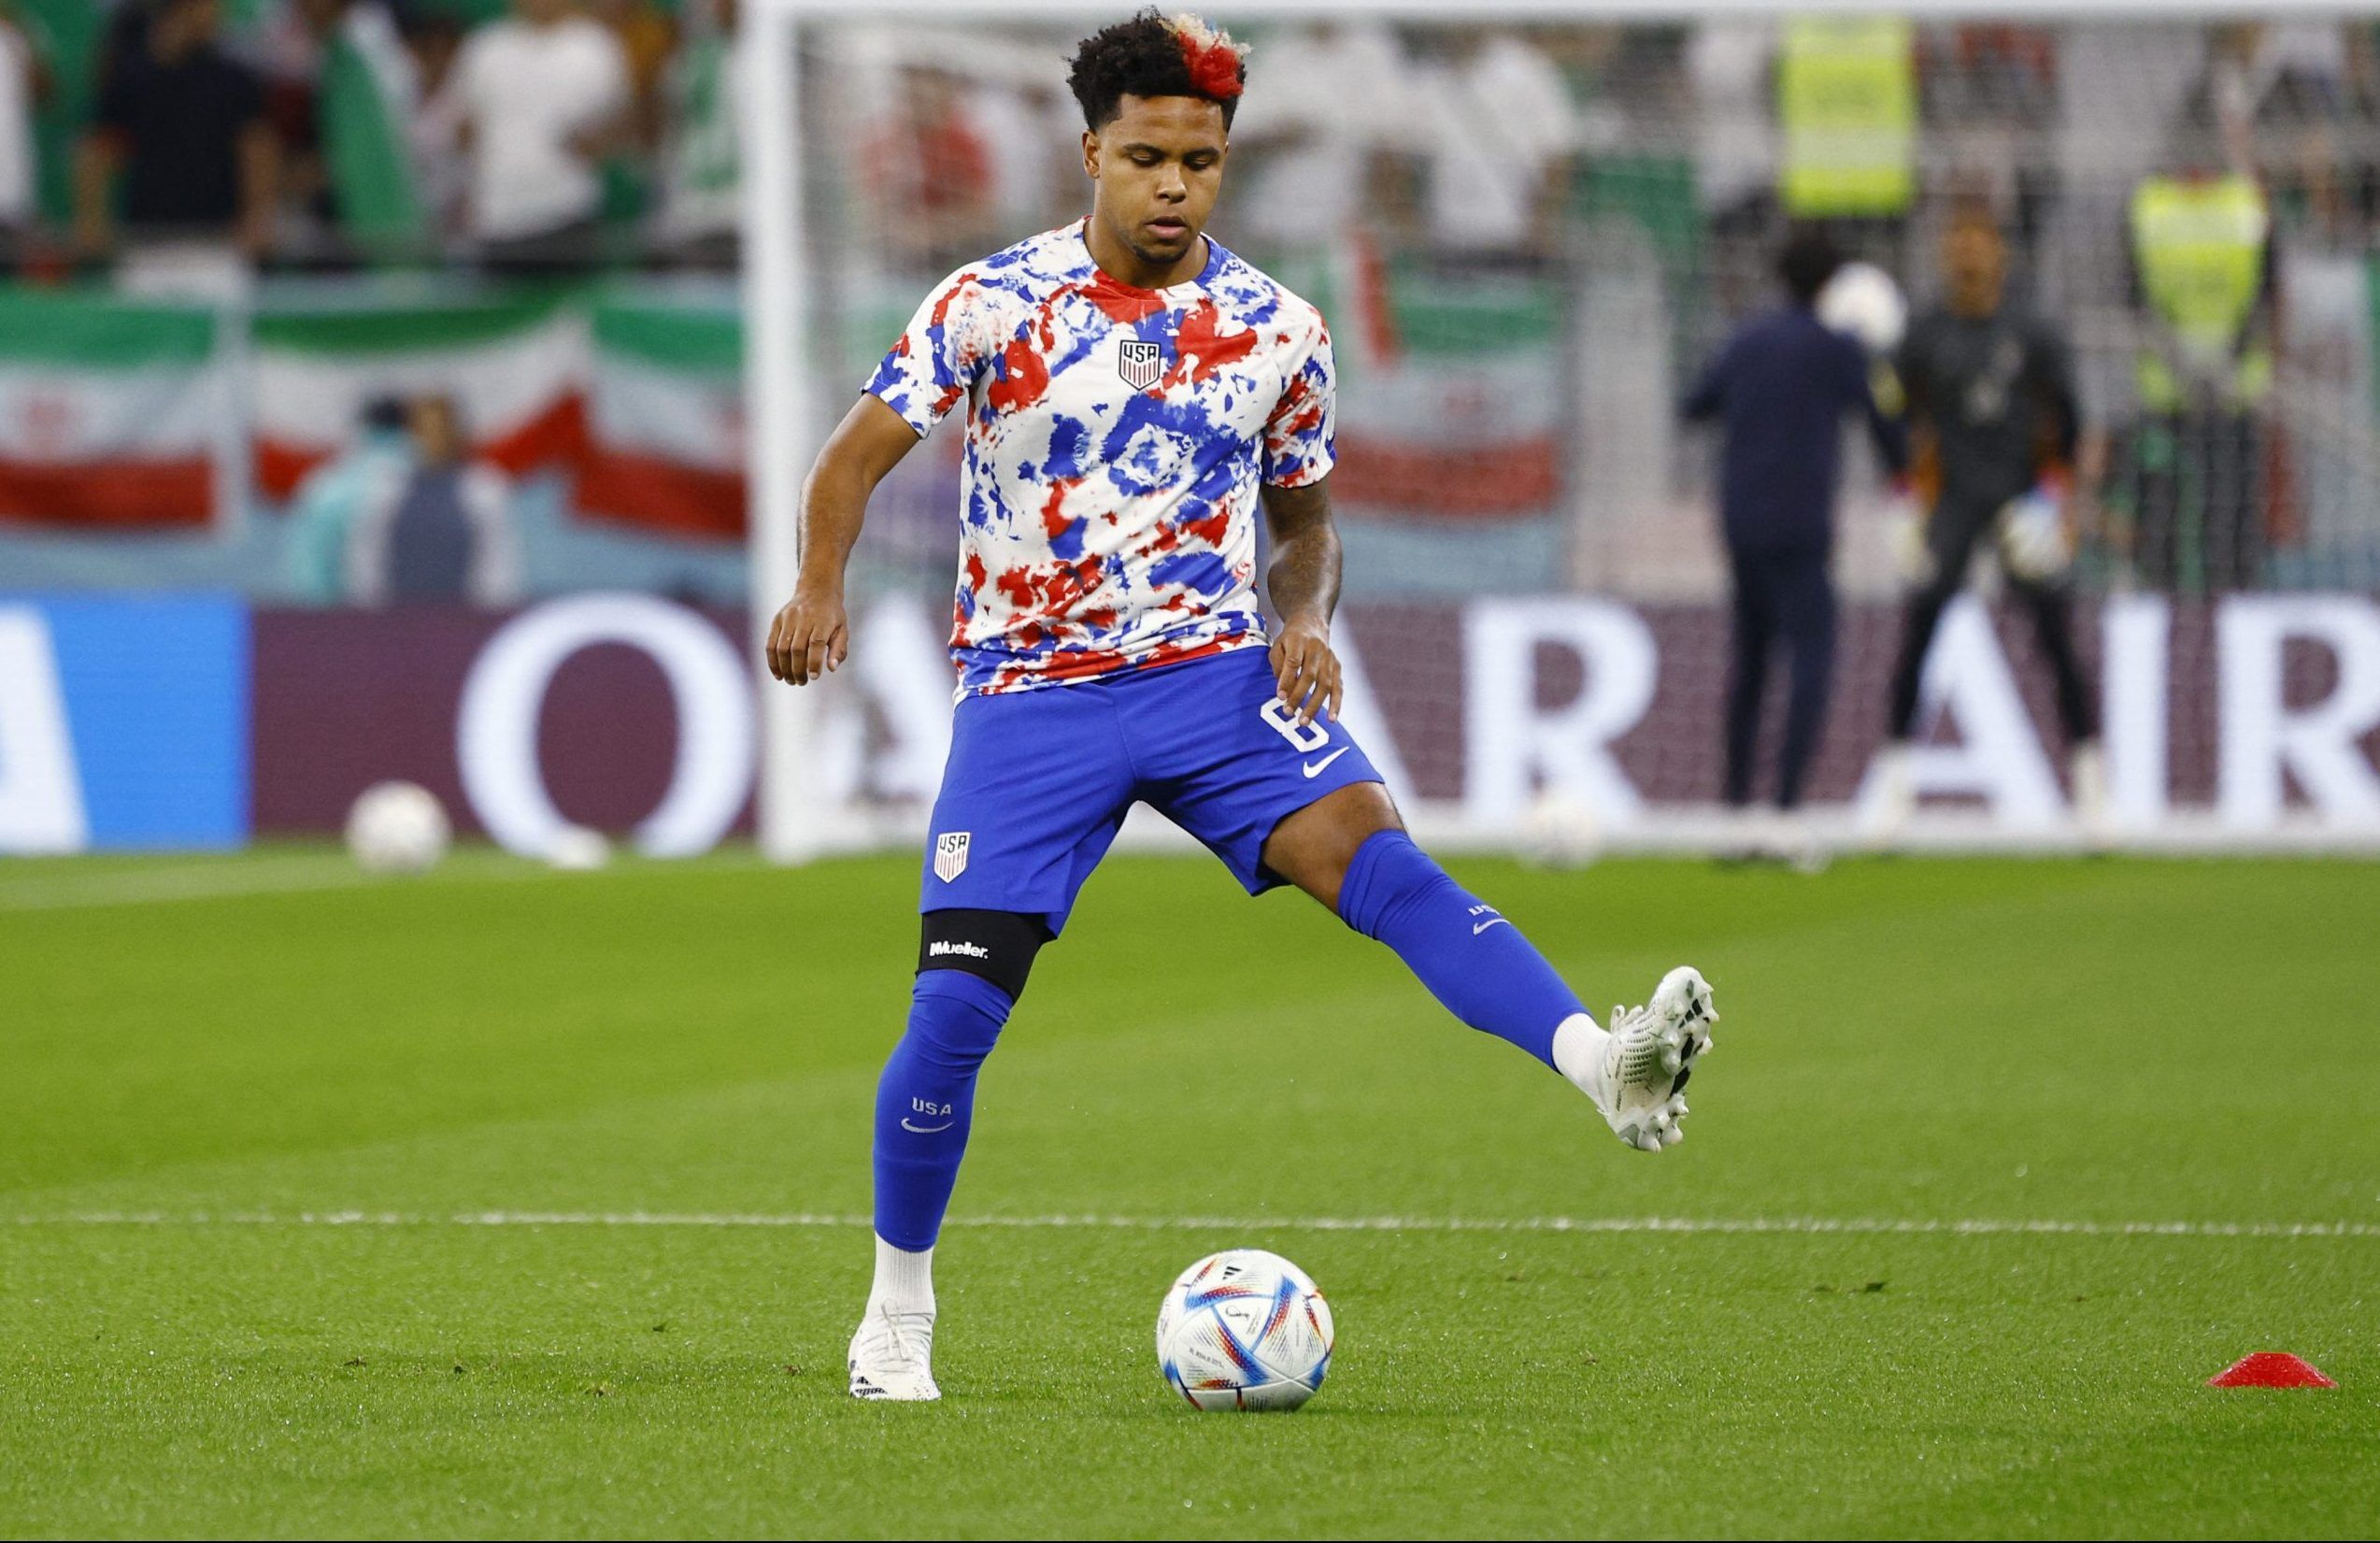 Weston McKennie of the U.S. during the warm up before the match at the World Cup in Qatar